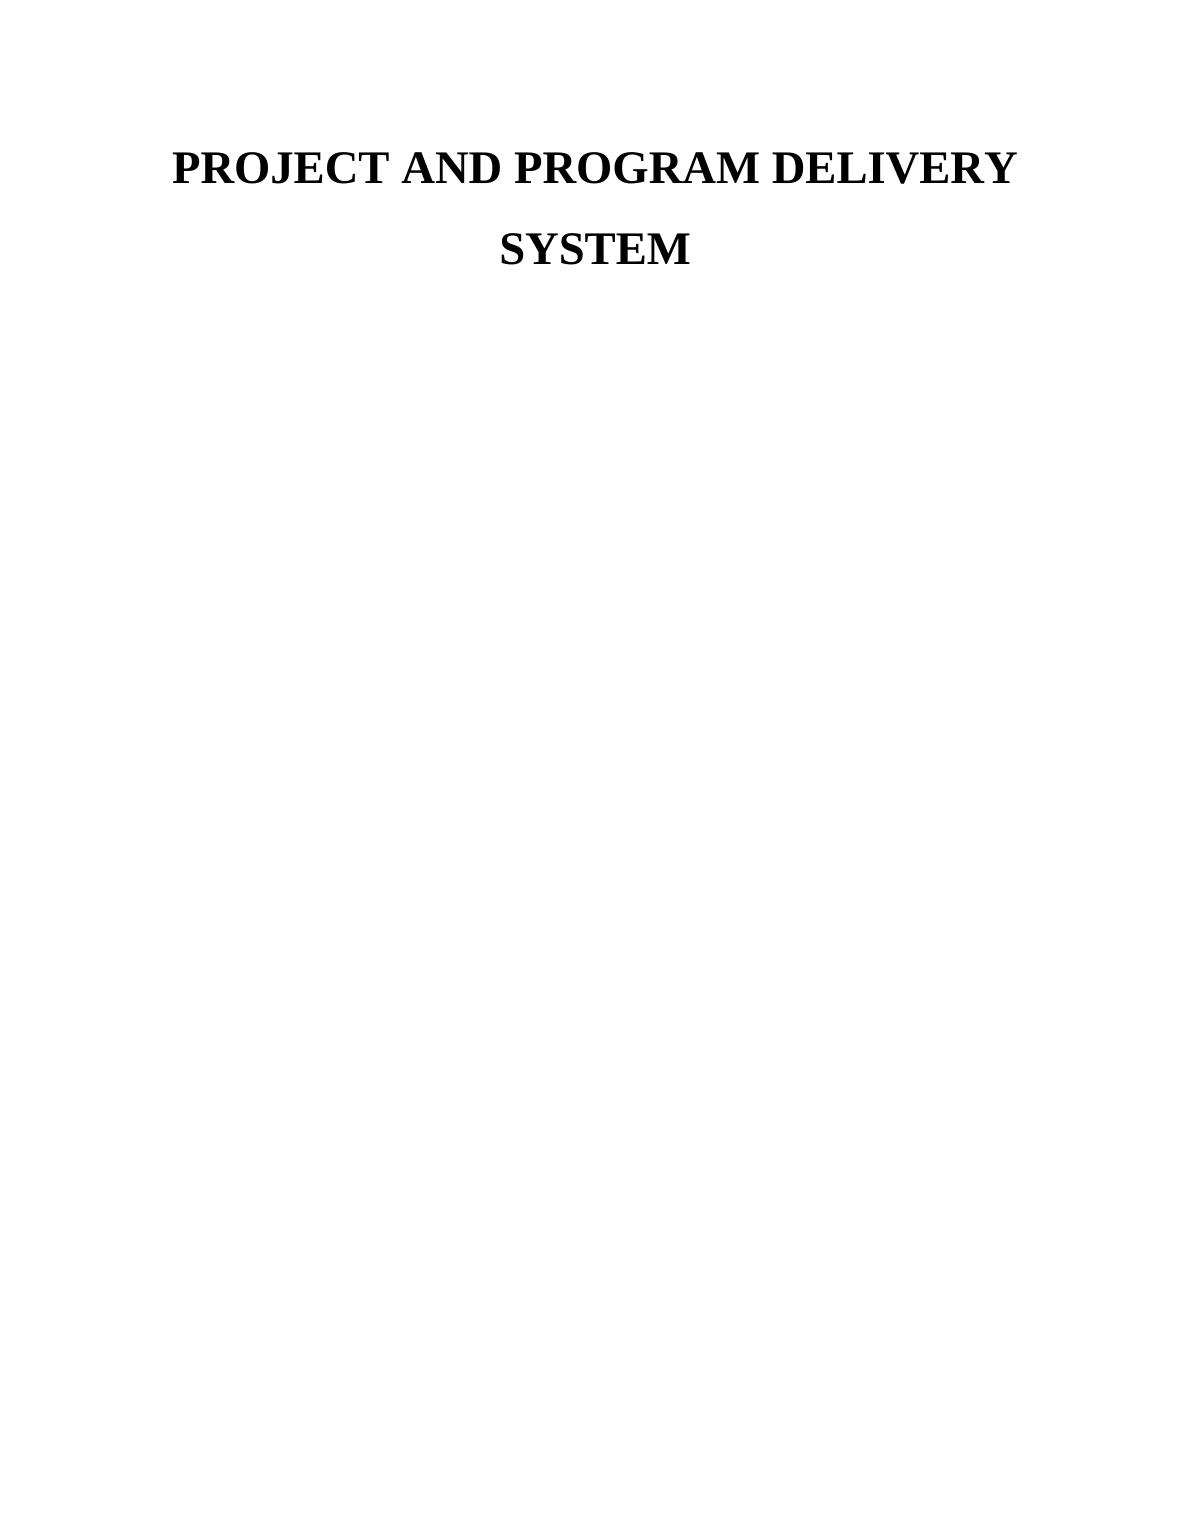 (PDF) Project Delivery System_1